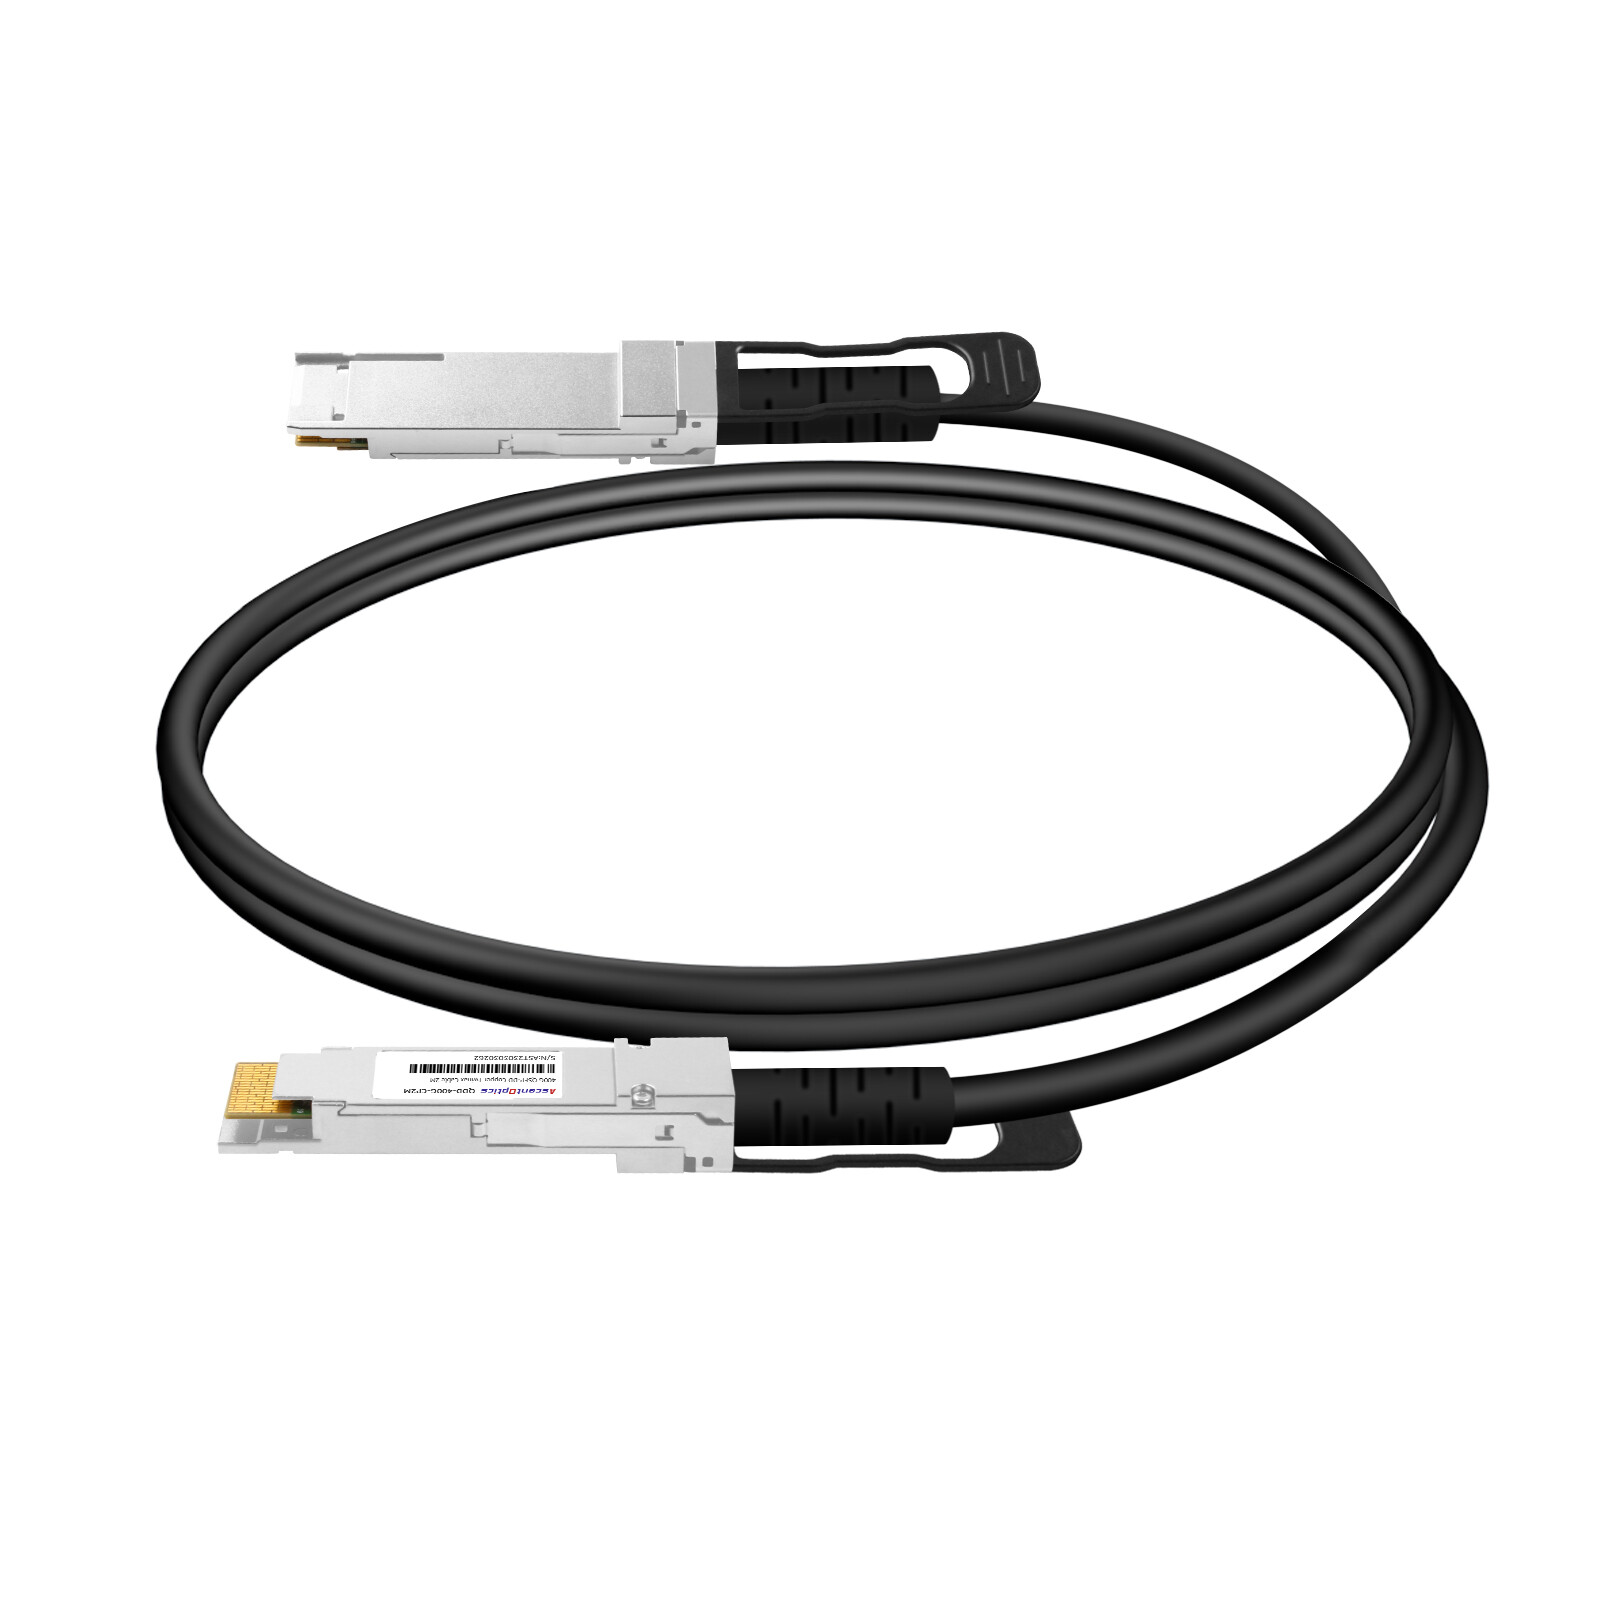 400G QSFP-DD Copper DAC Cable,2 Meters,Passive